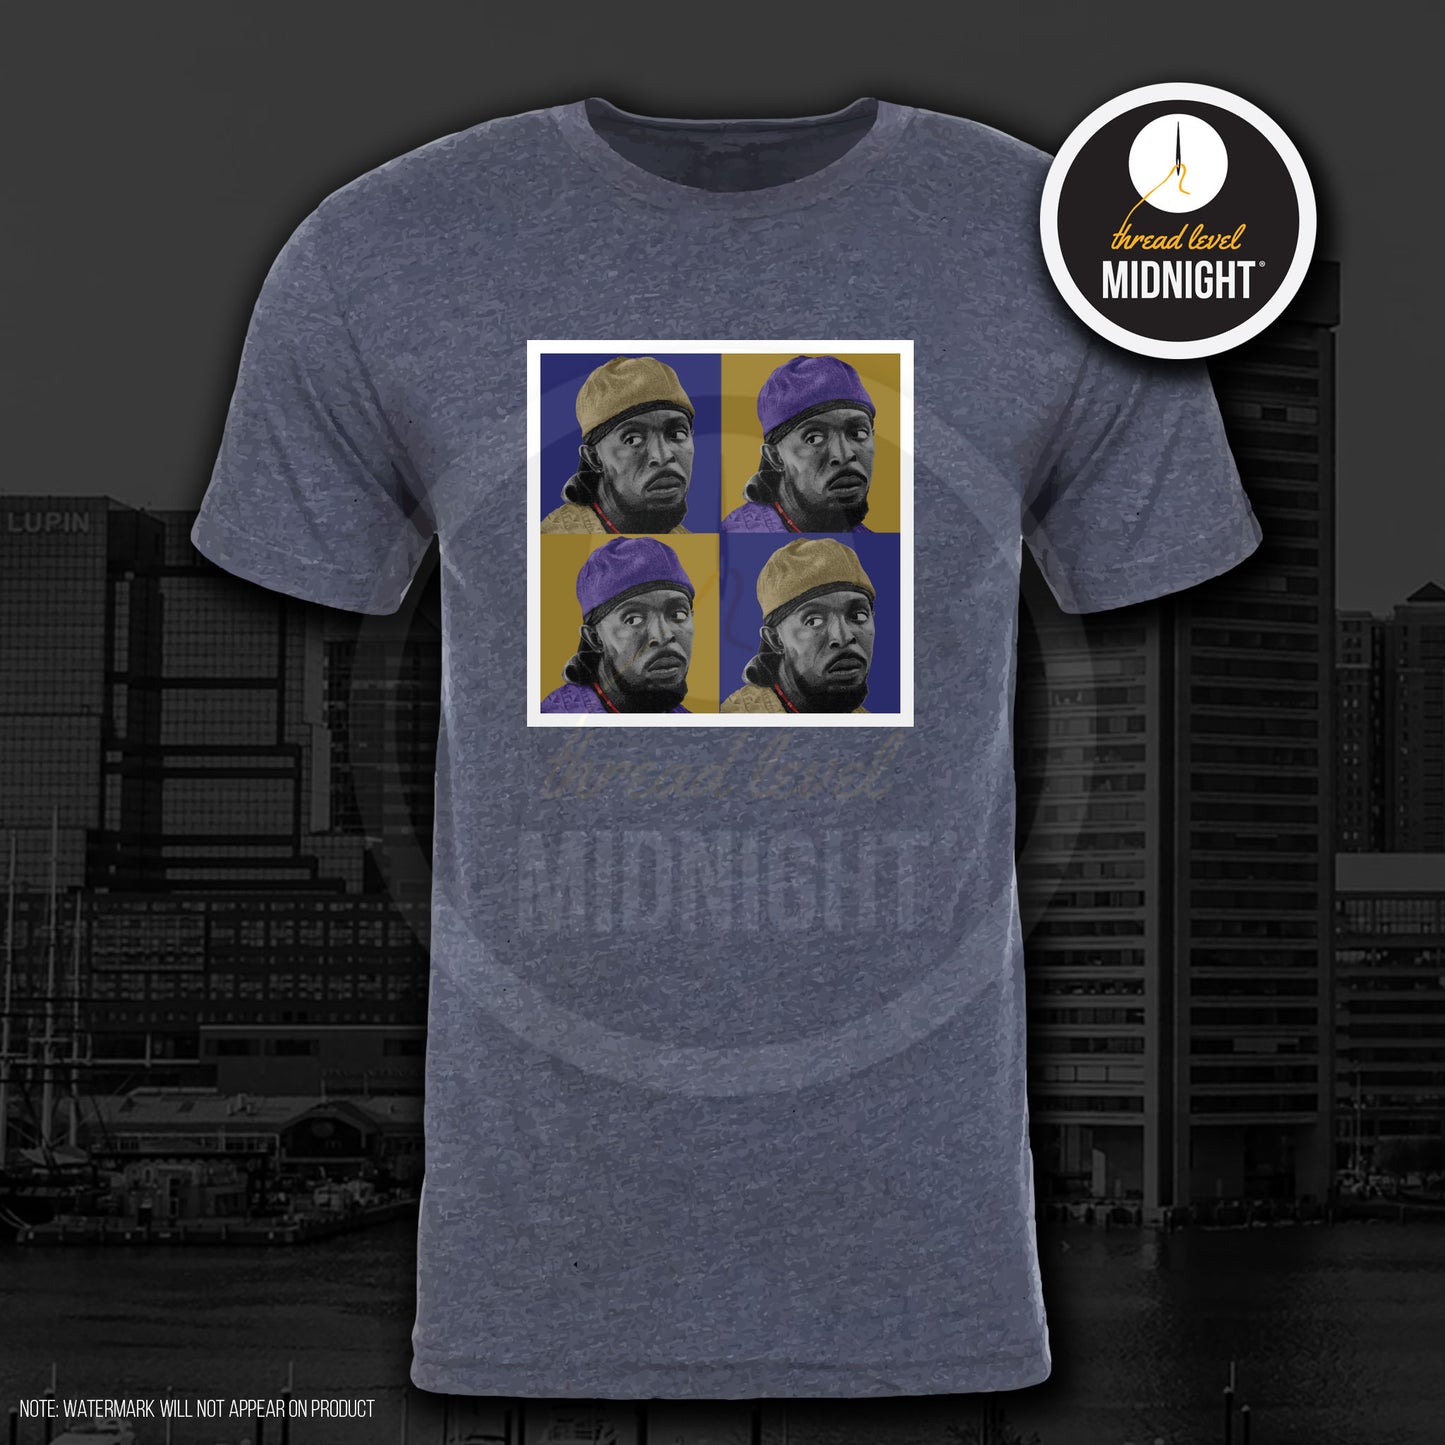 Tribute to Omar Collection: OMAR Collage - Ravens Colors (Black/Purple/White/Grey/Navy)